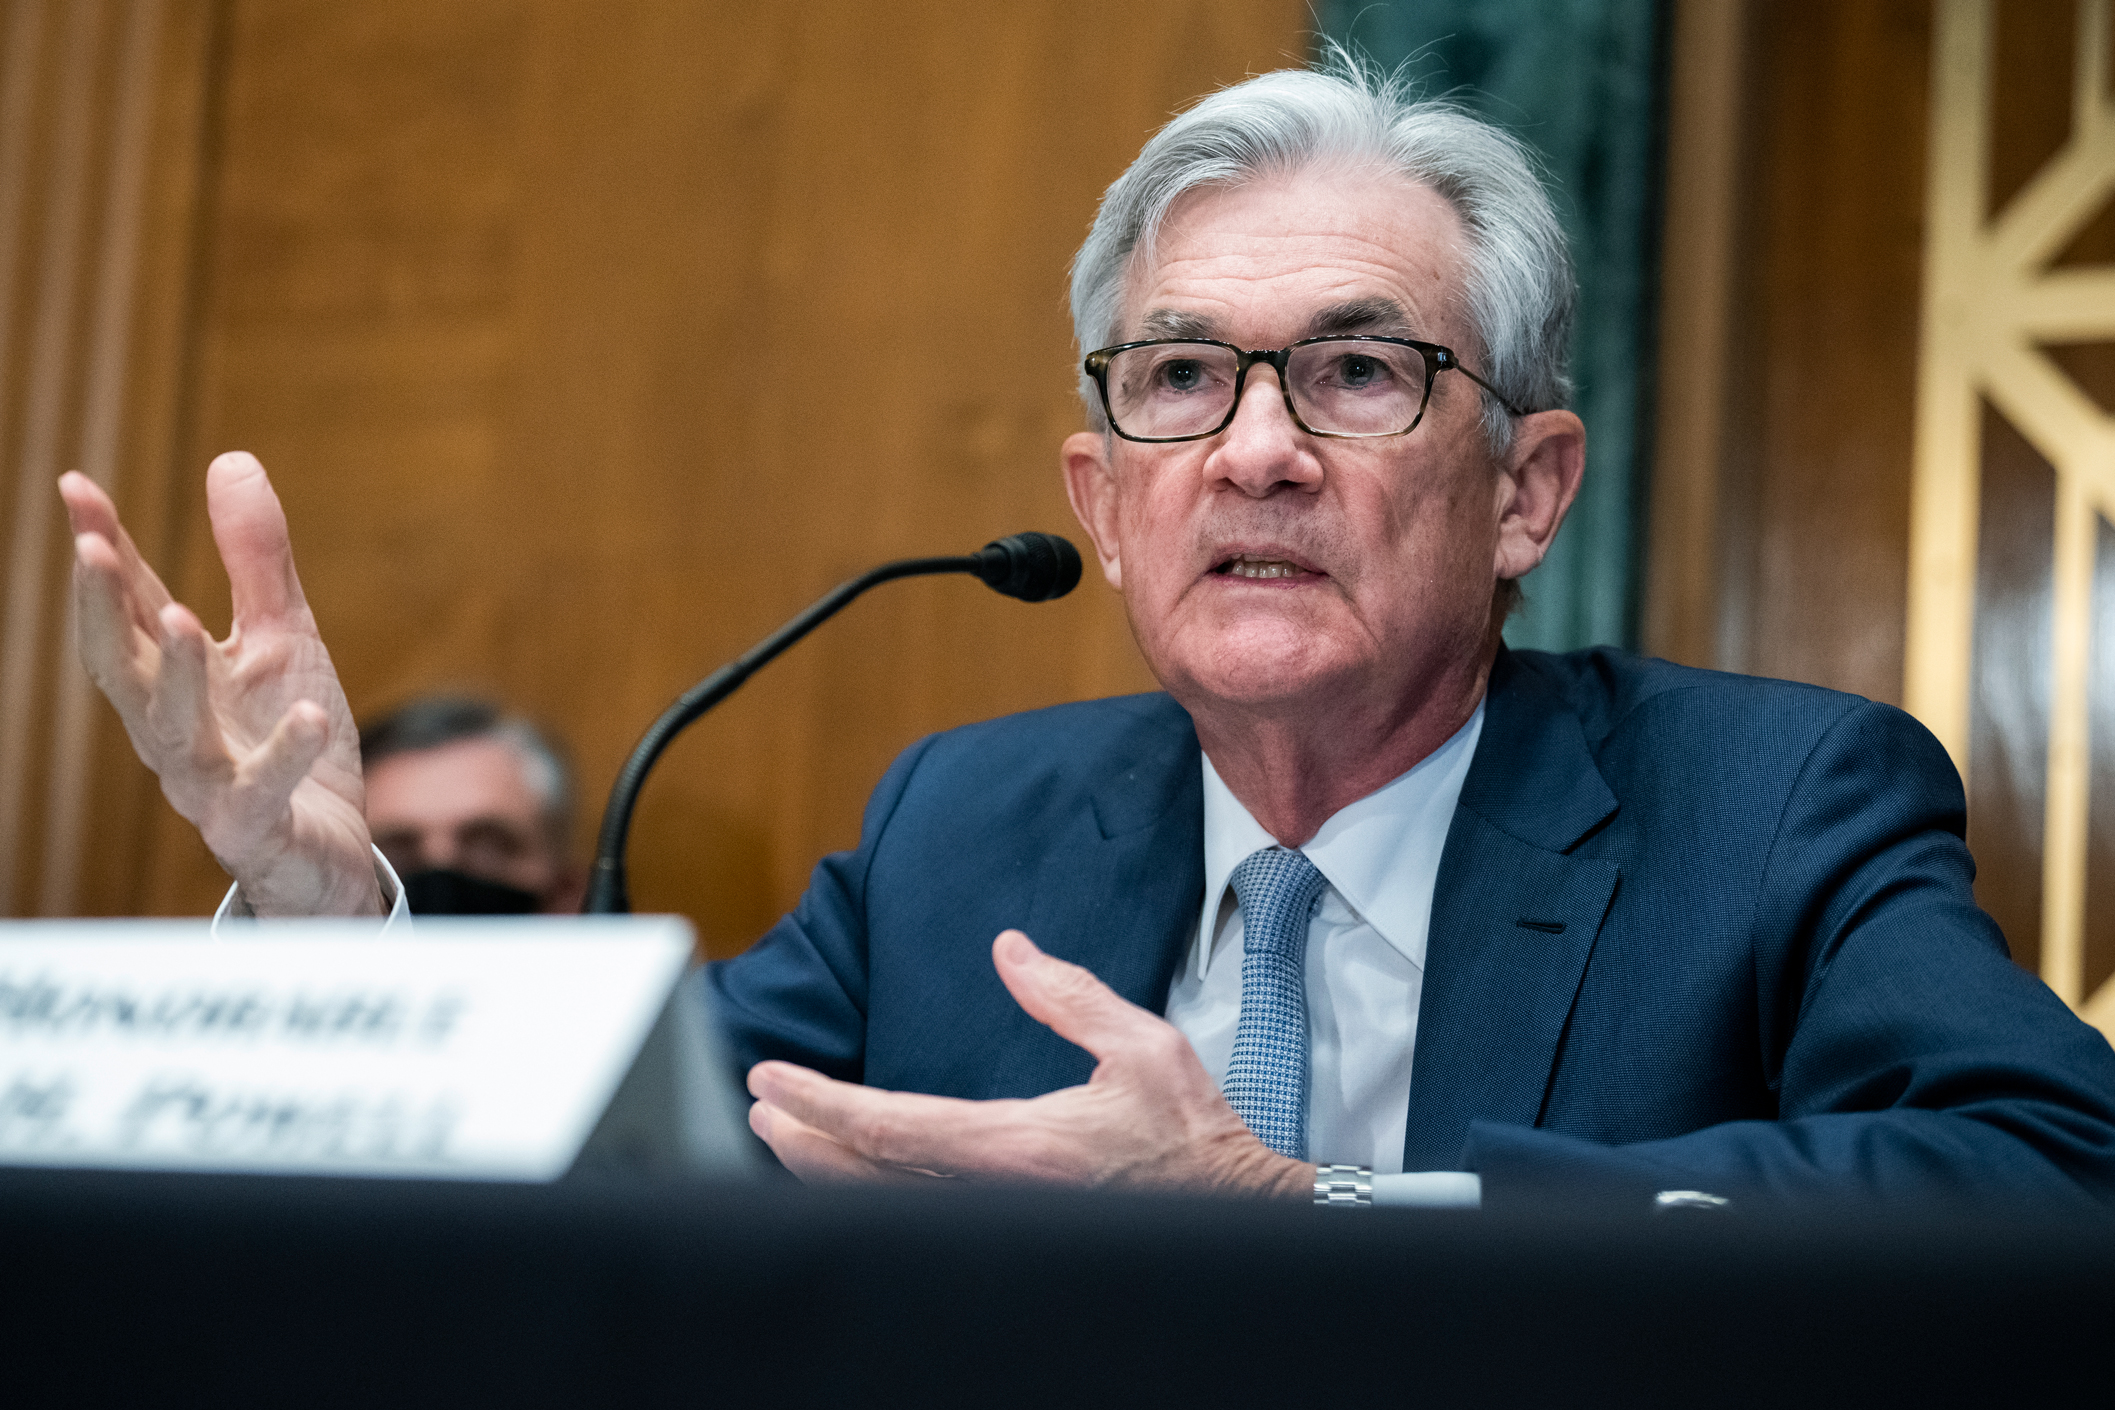 Federal Reserve Chairman Jerome Powell testifies during the Senate Banking Committee hearing